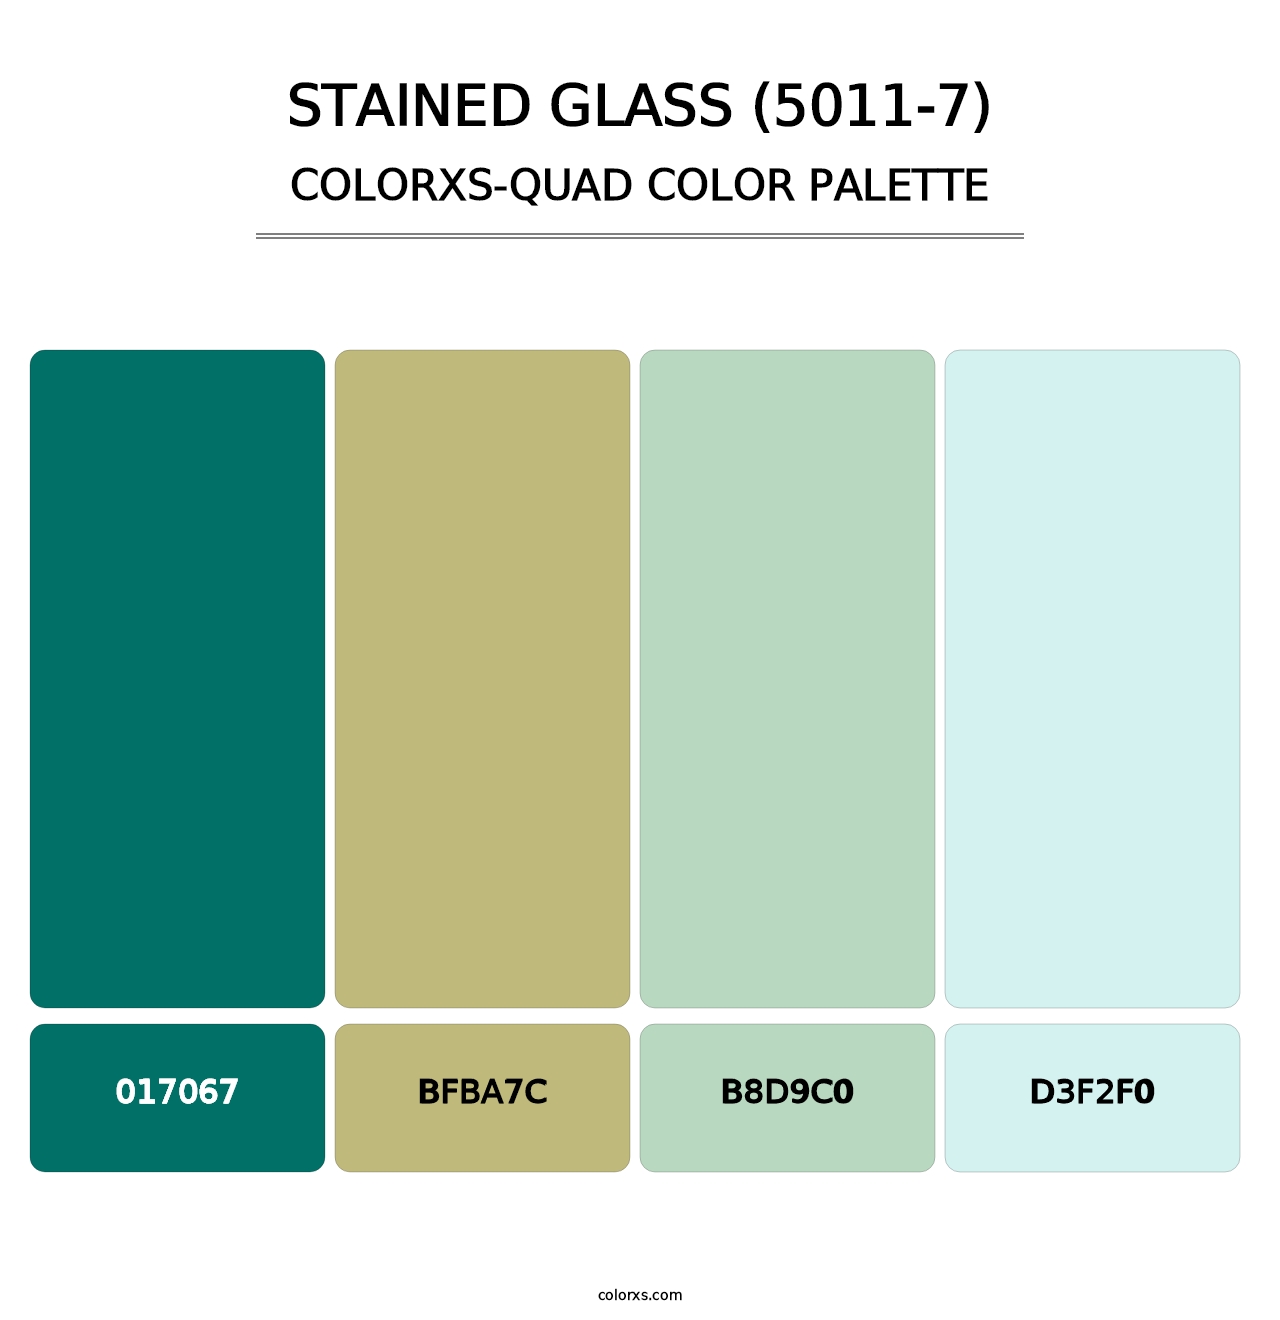 Stained Glass (5011-7) - Colorxs Quad Palette